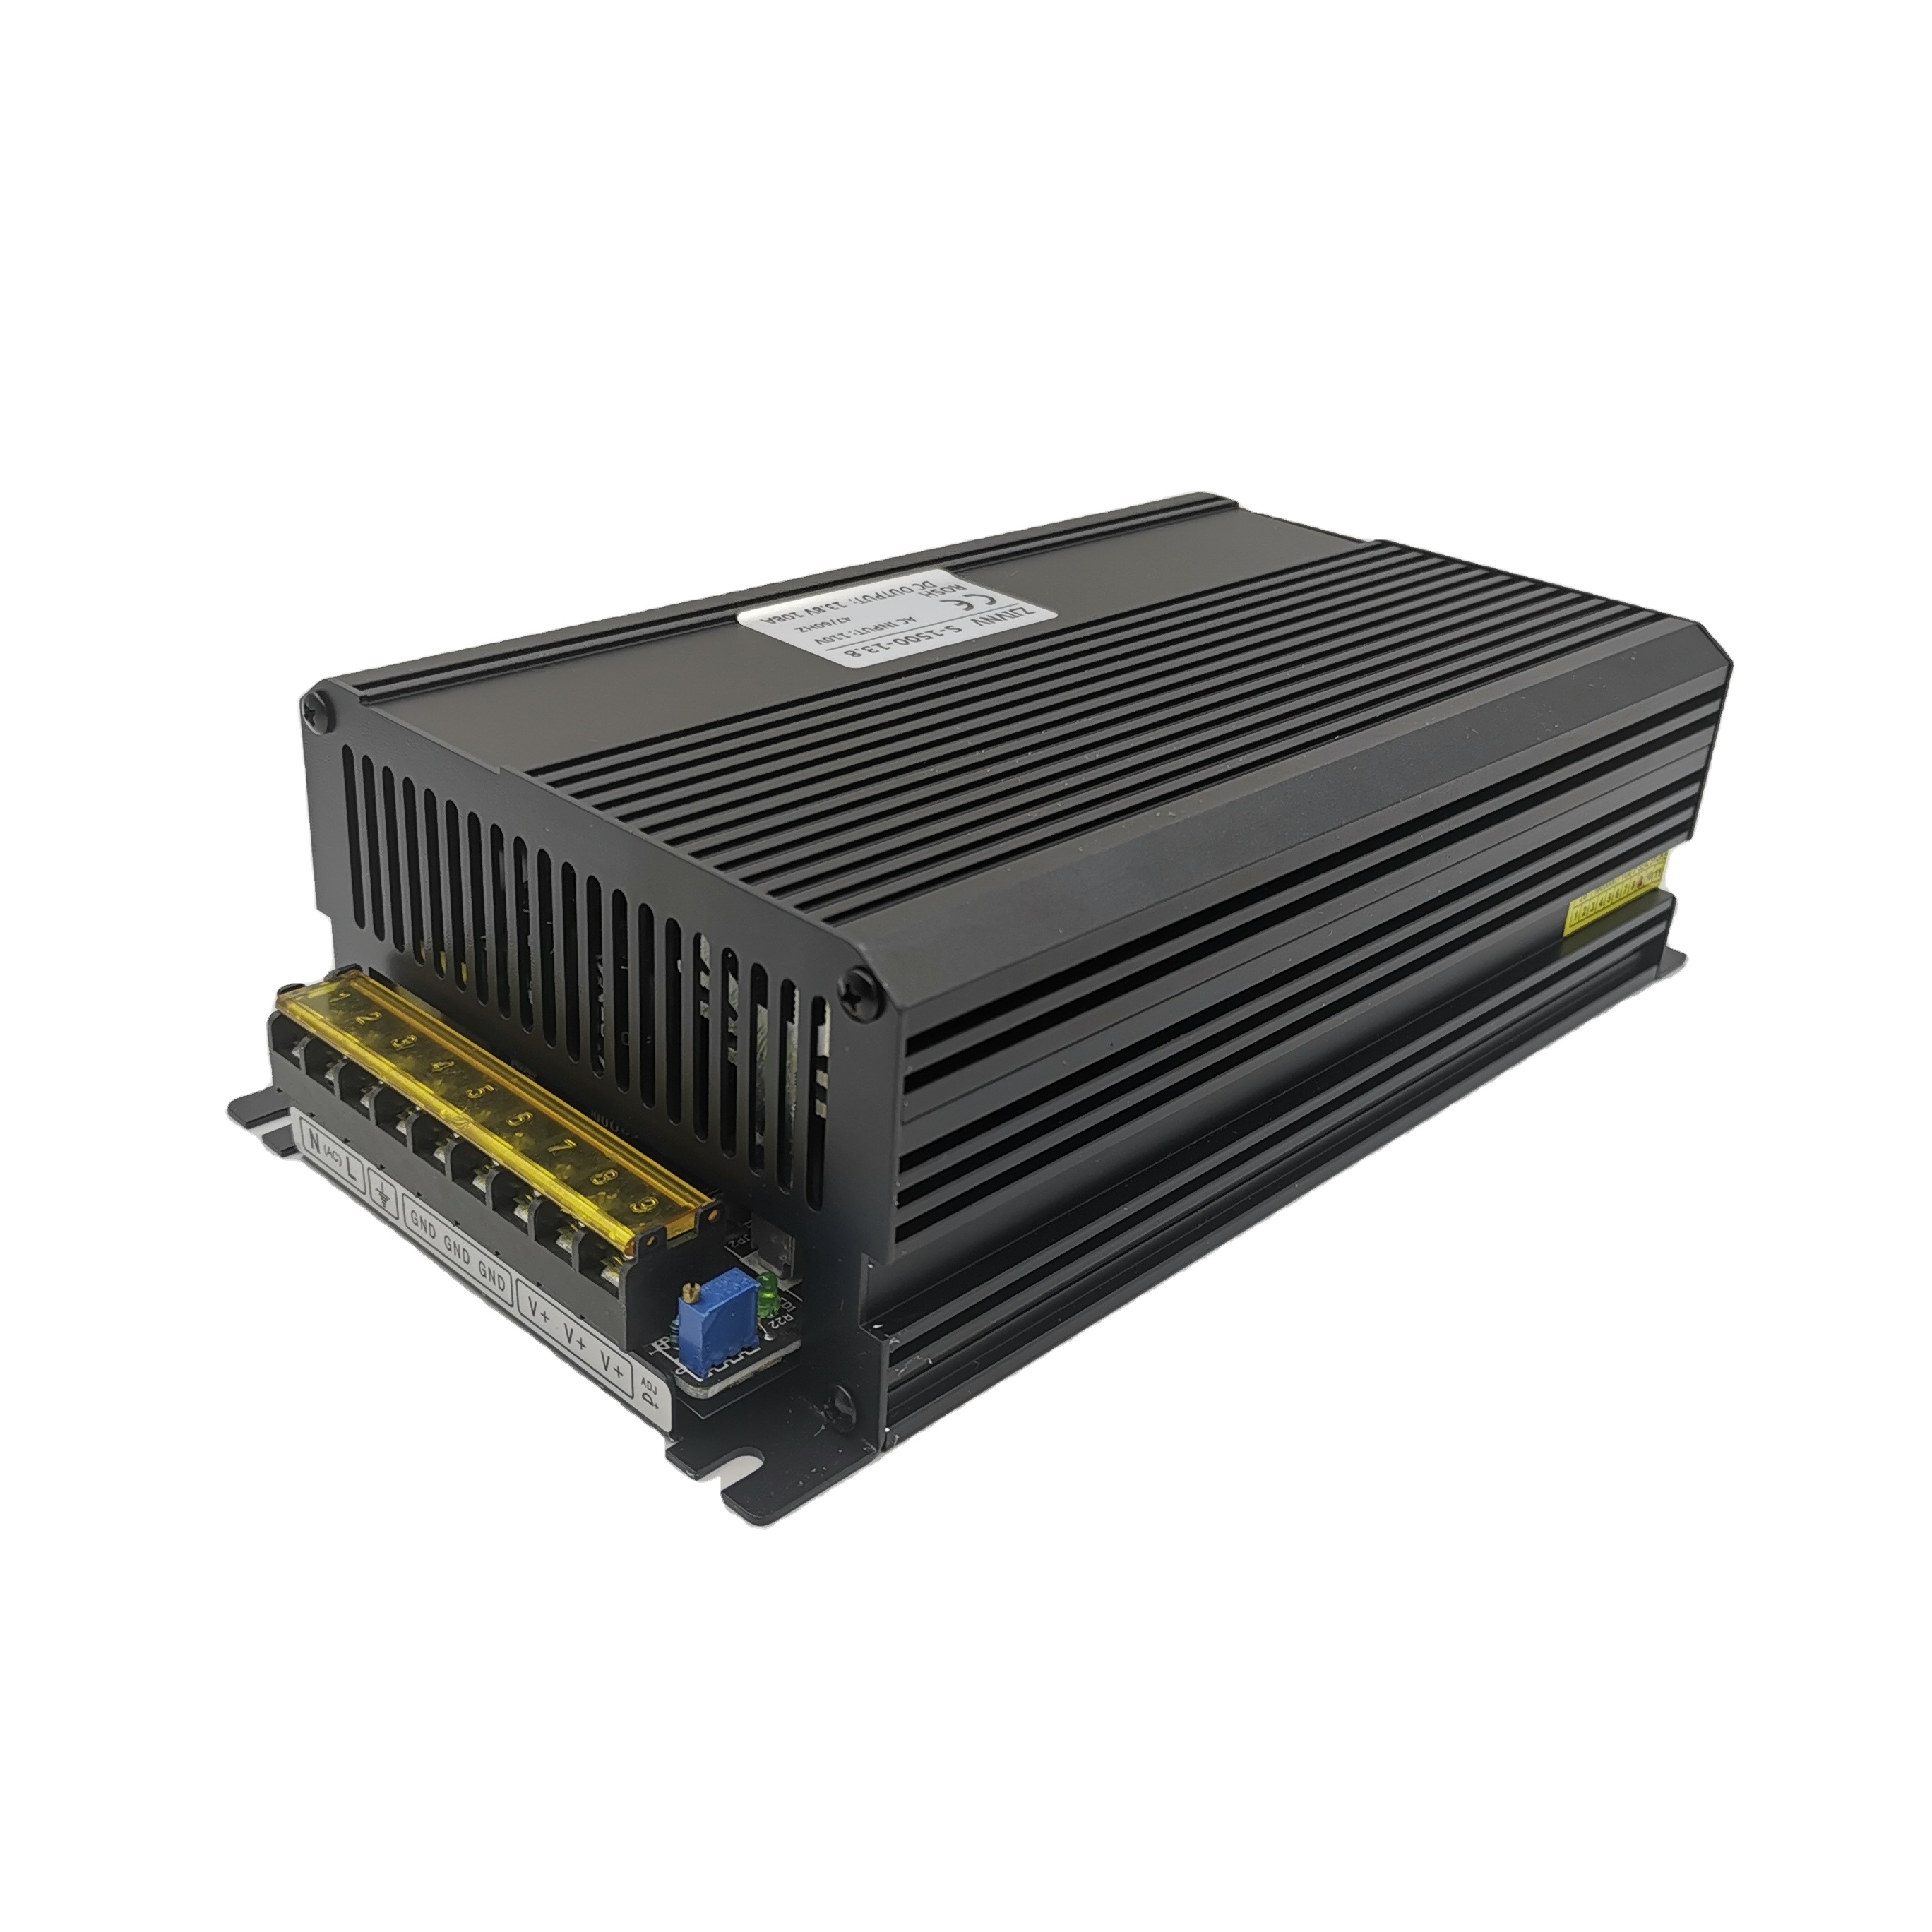 China OEM 12v 2.5 A Power Supply - AC/DC 36V 50A 1800W Switching Power Supply for Equipment/ Lighting – Huyssen